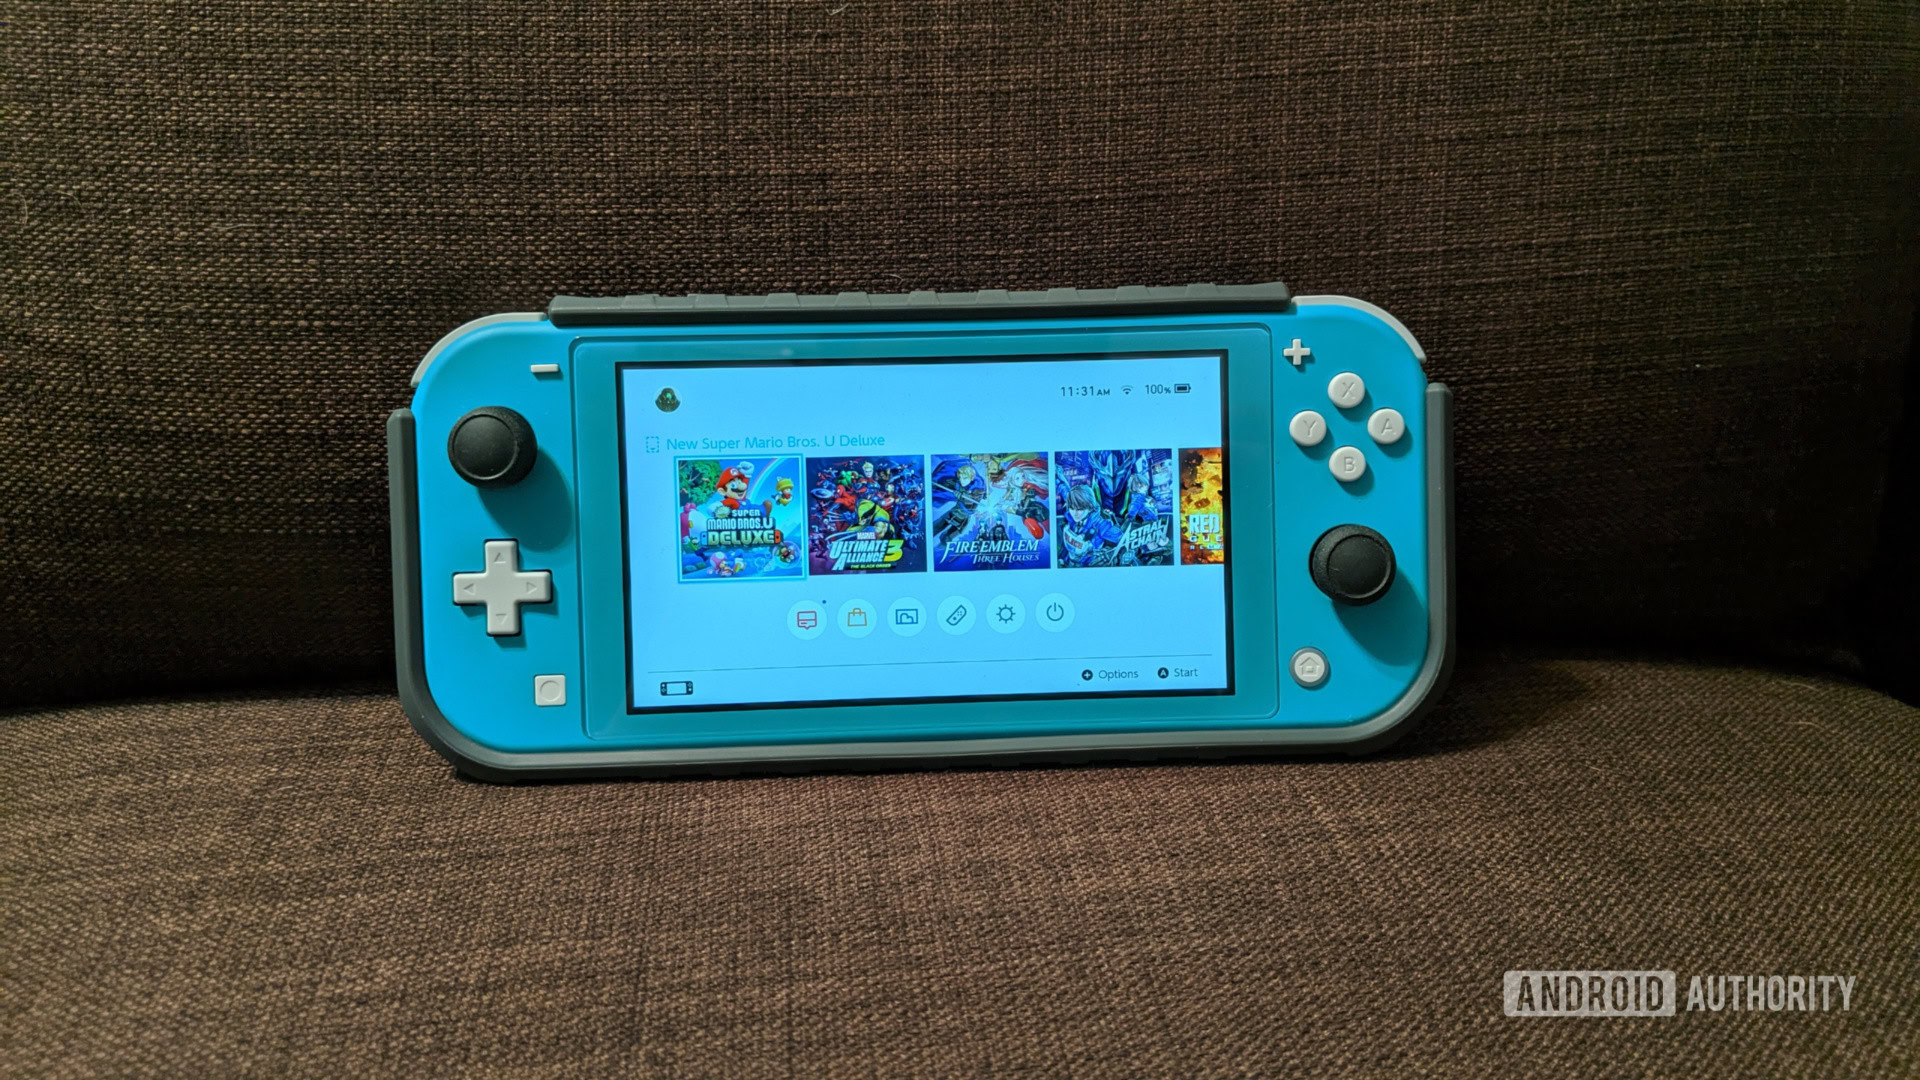 Nintendo Reportedly Wanted the Switch Lite Price to Be Less Than $200